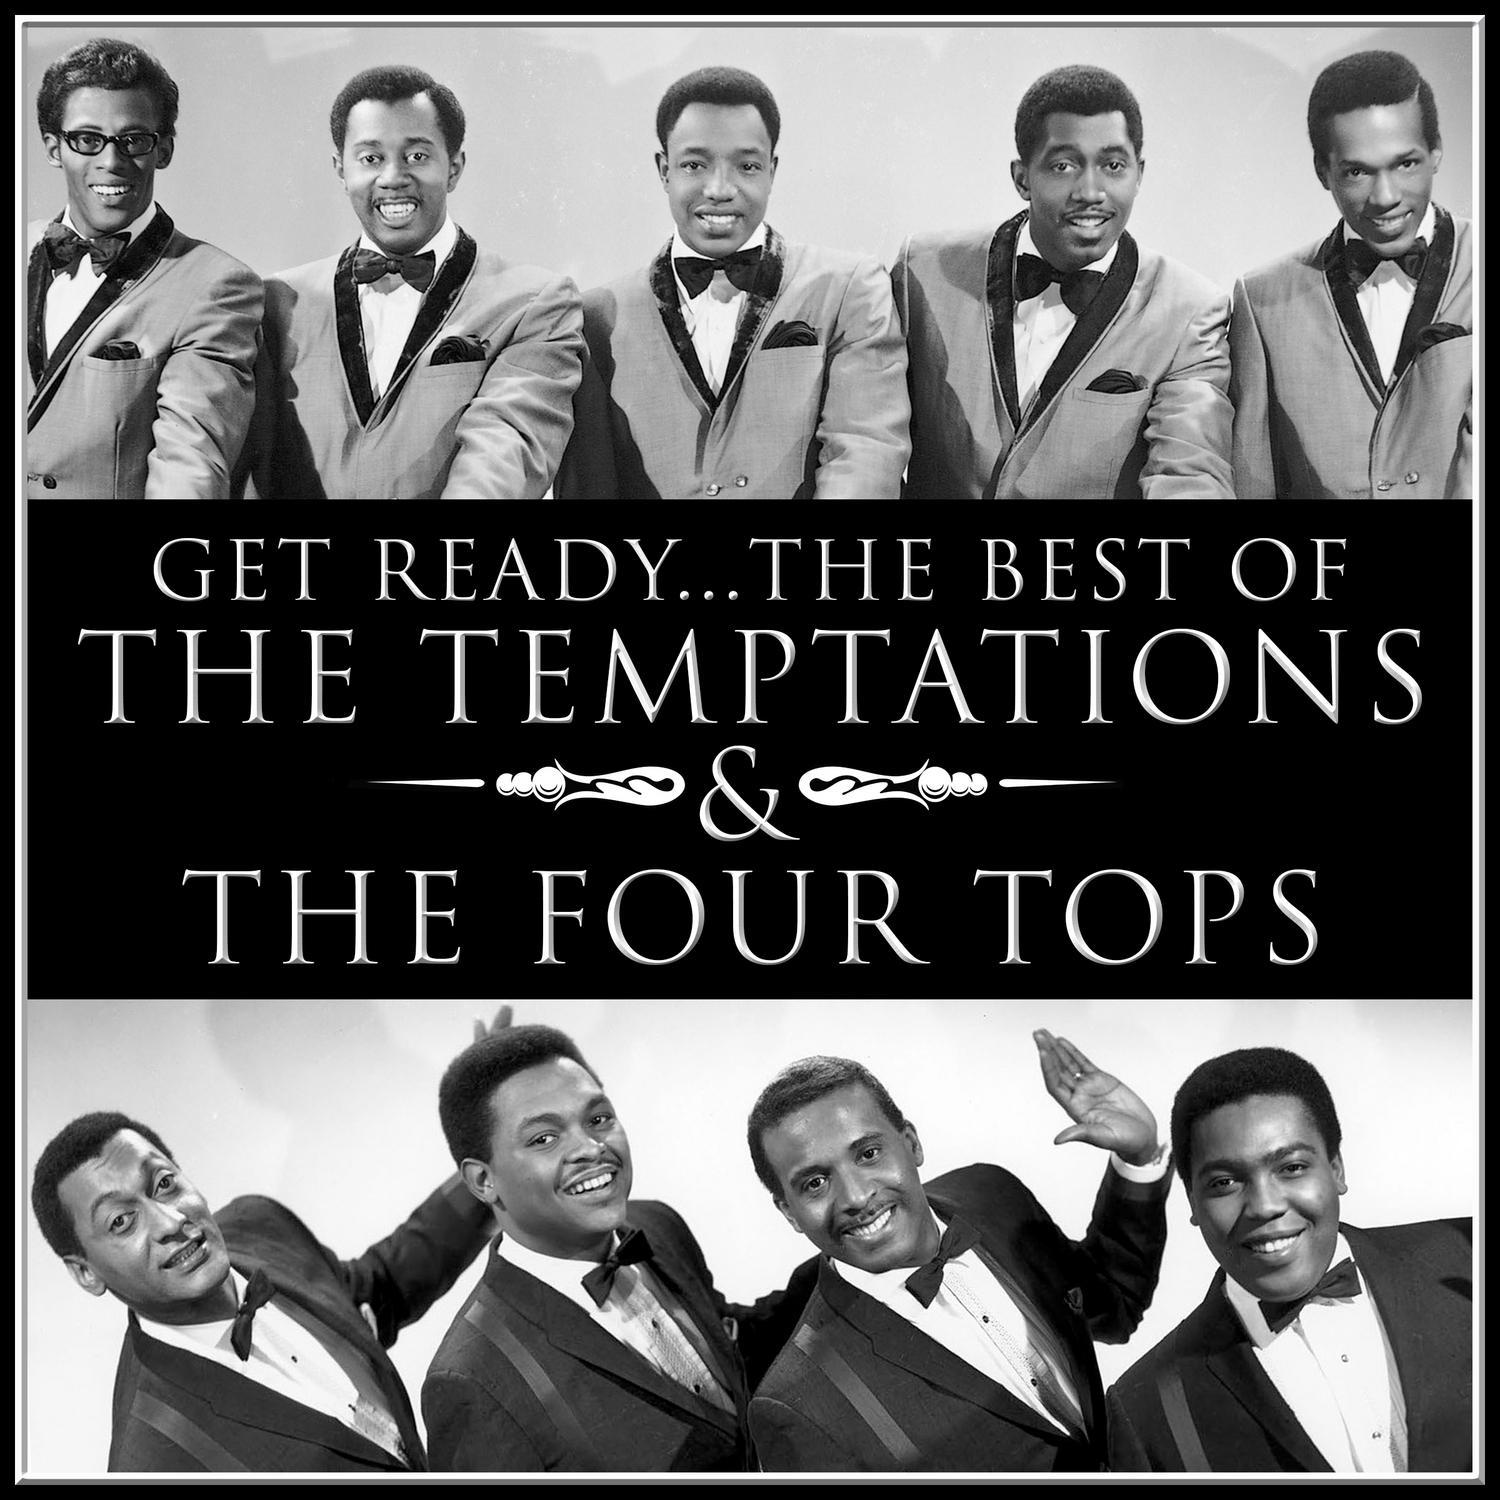 Get Ready the Best of the Temptations and the Four Tops